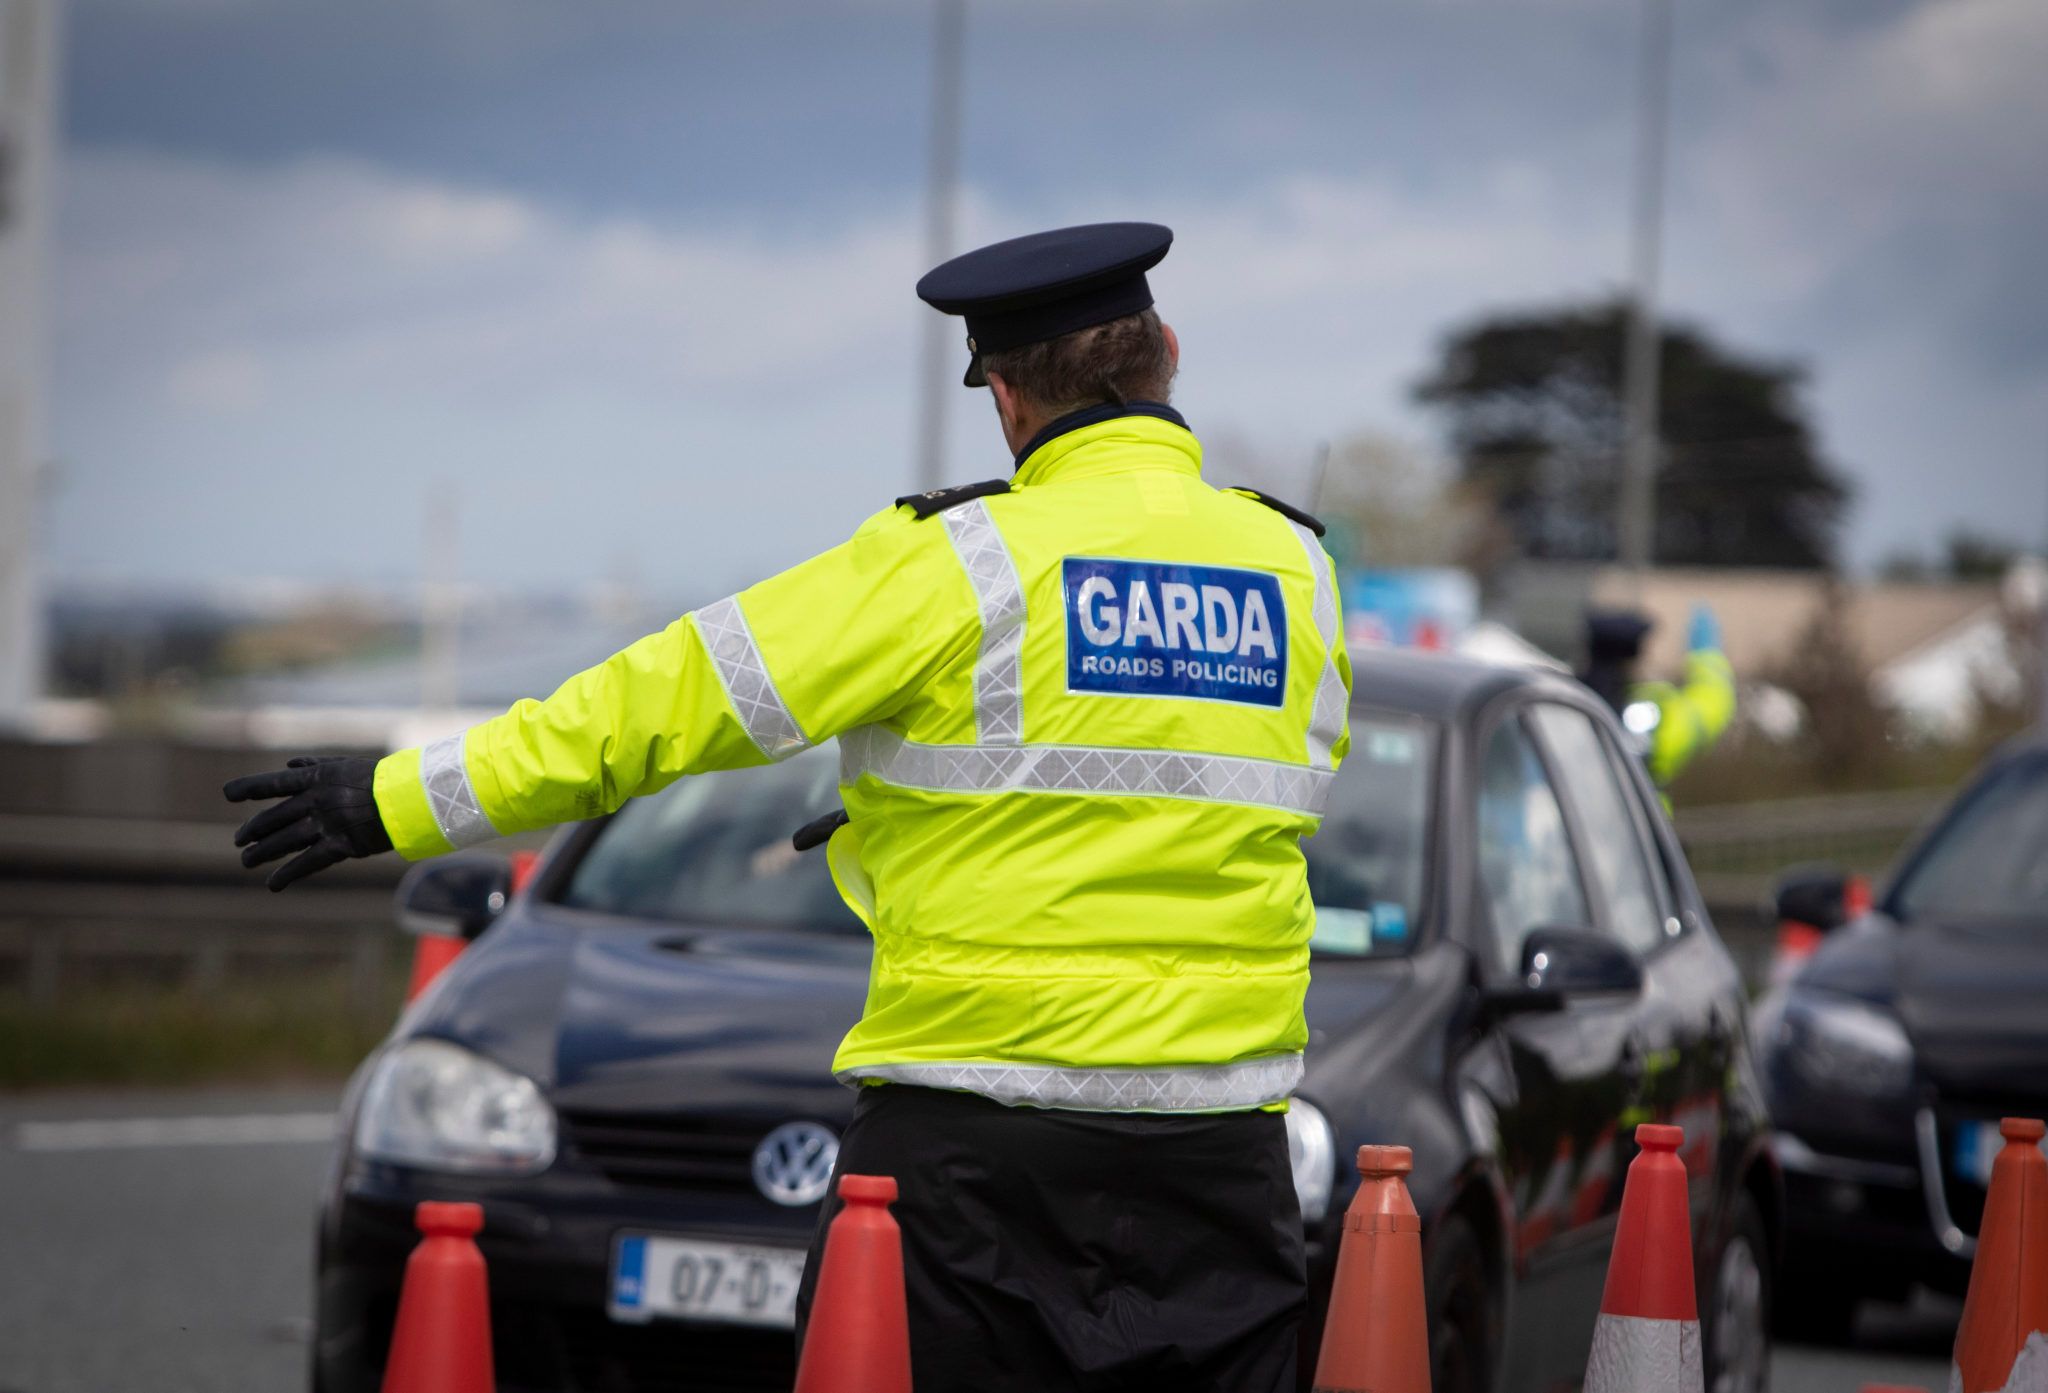 Over 100 people fined in Wicklow for breaking lockdown rules